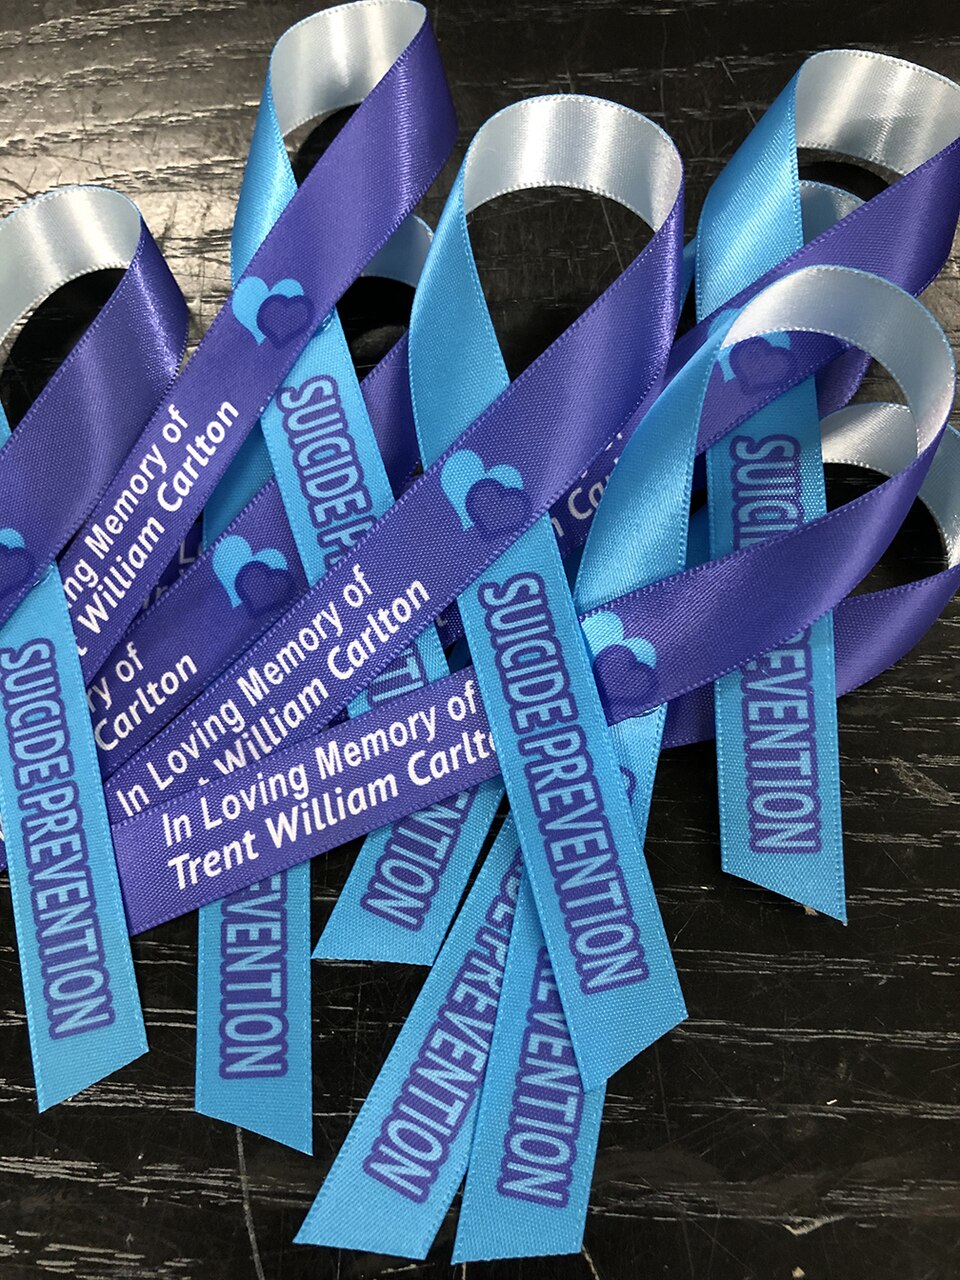 Personalized Suicide Awareness Ribbon (Purple-Teal) - Pack of 10.